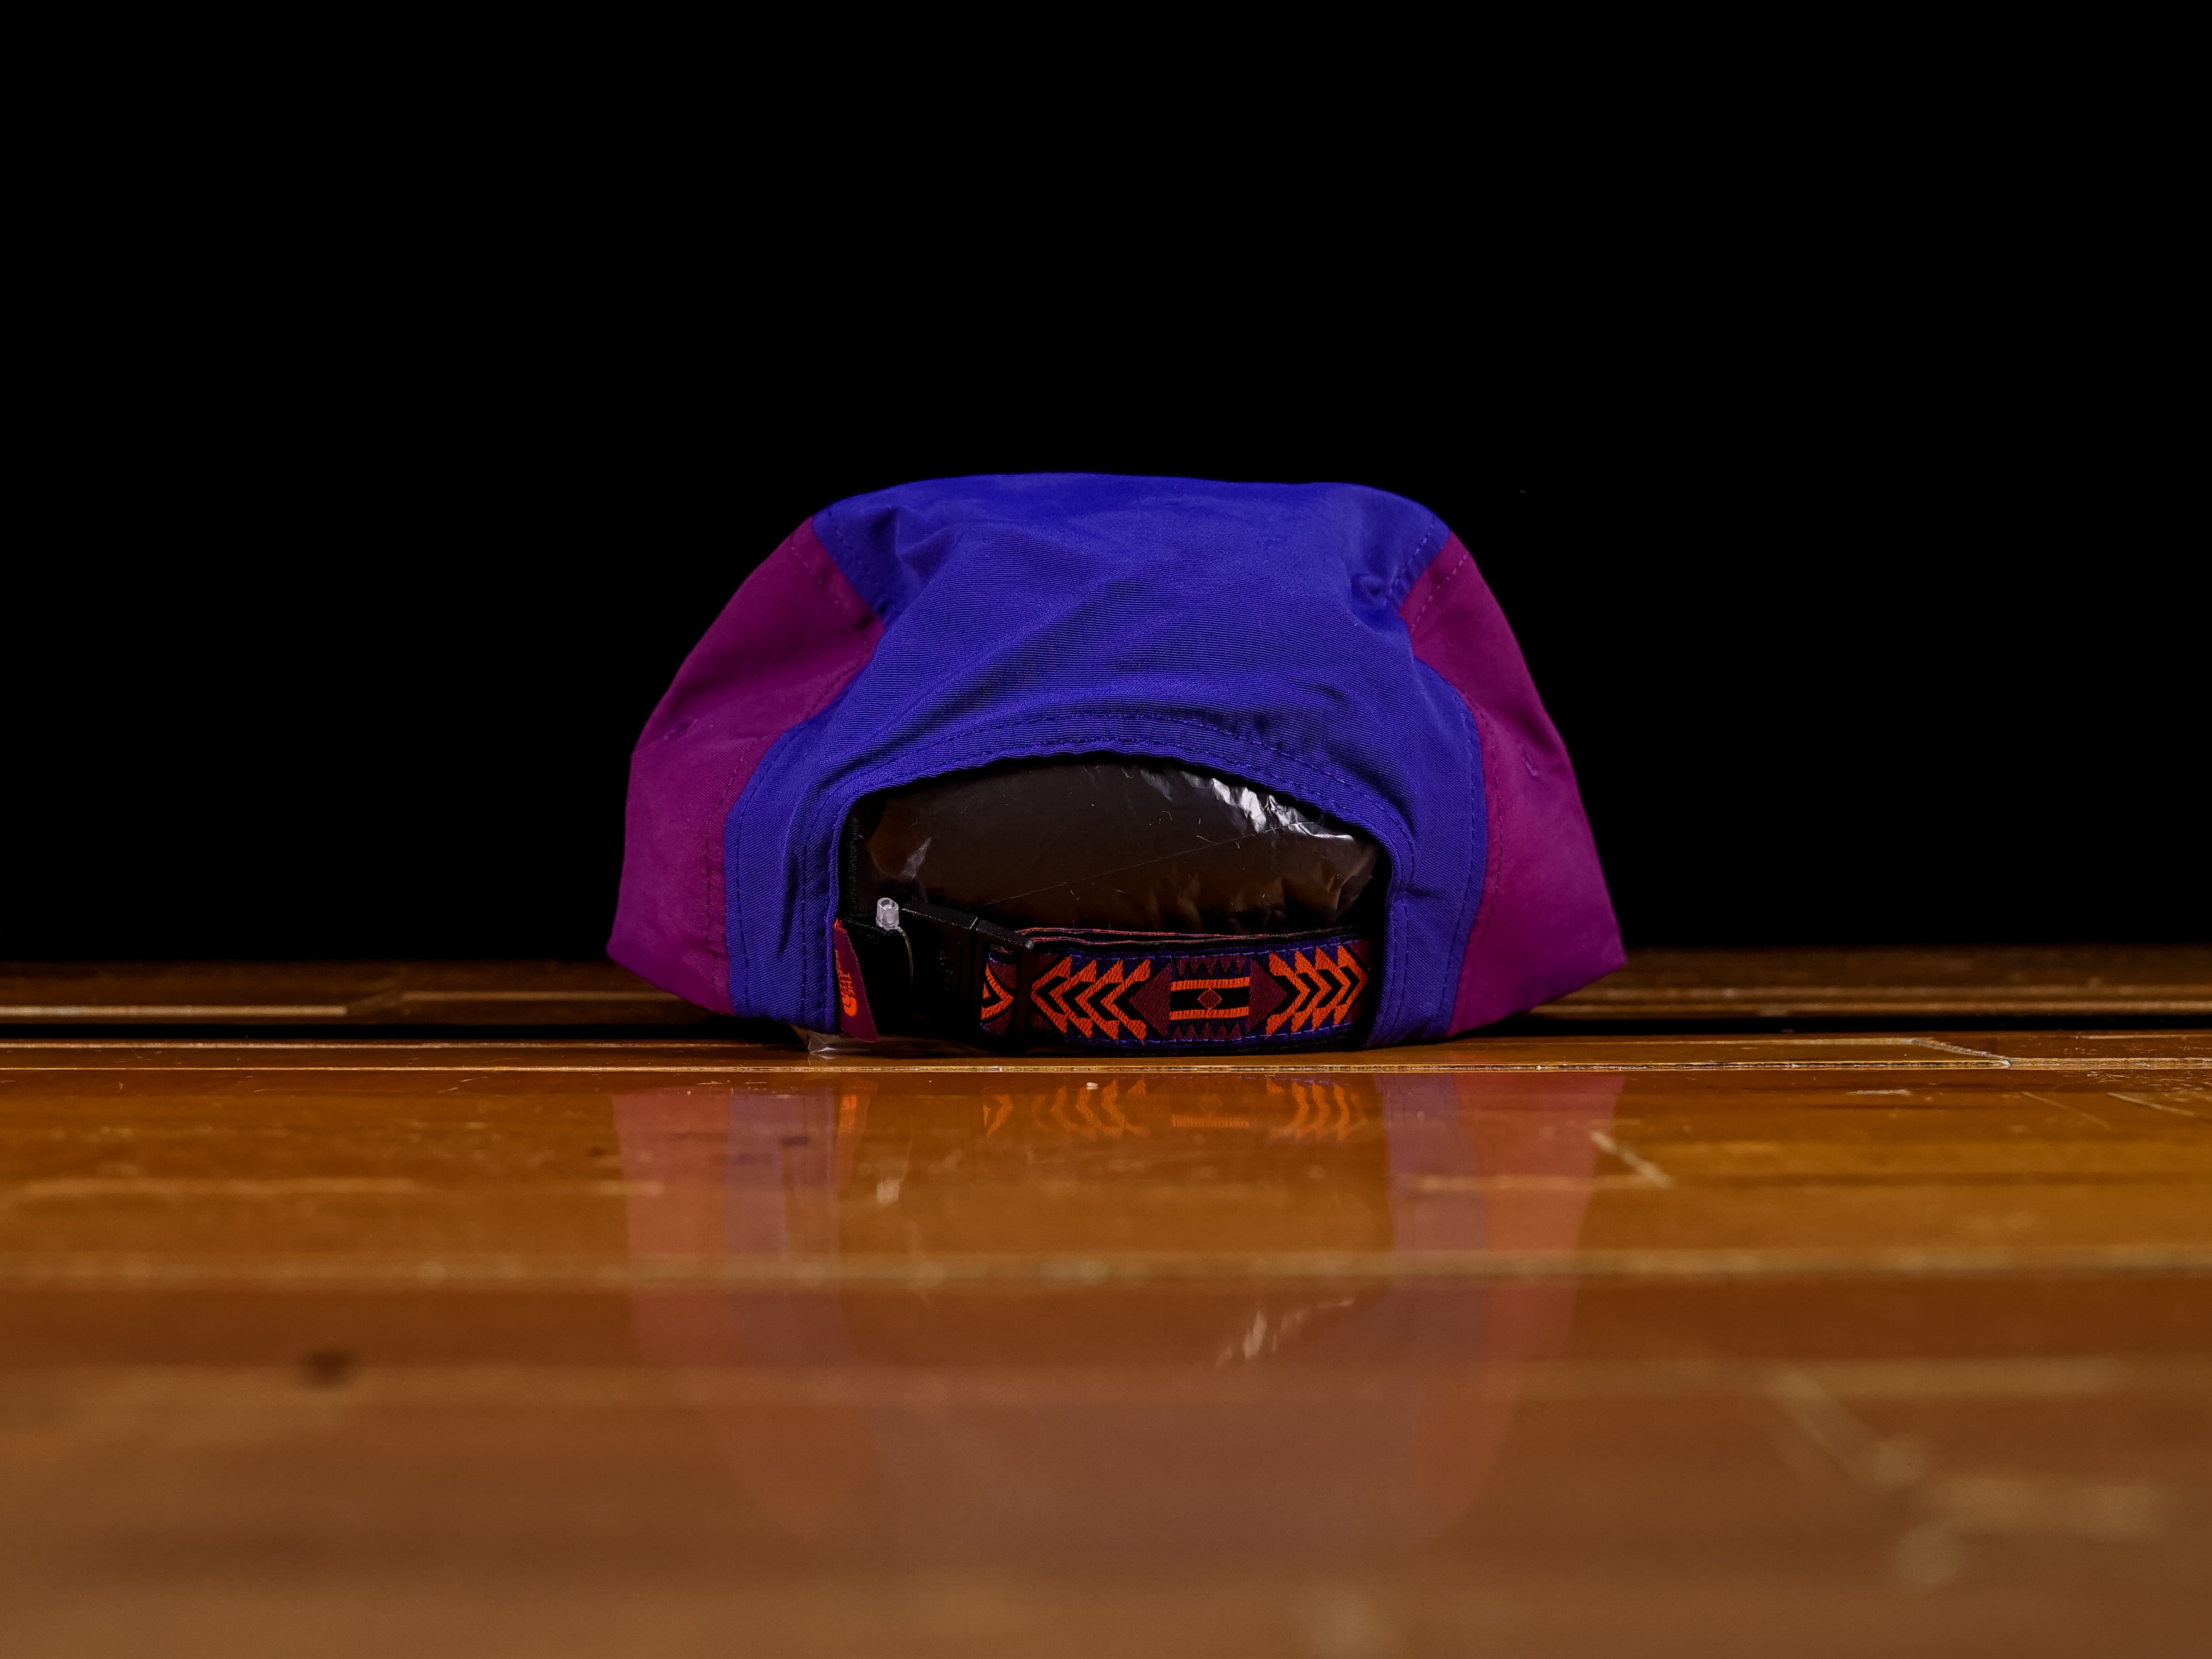 The North Face '92 Rage Hat